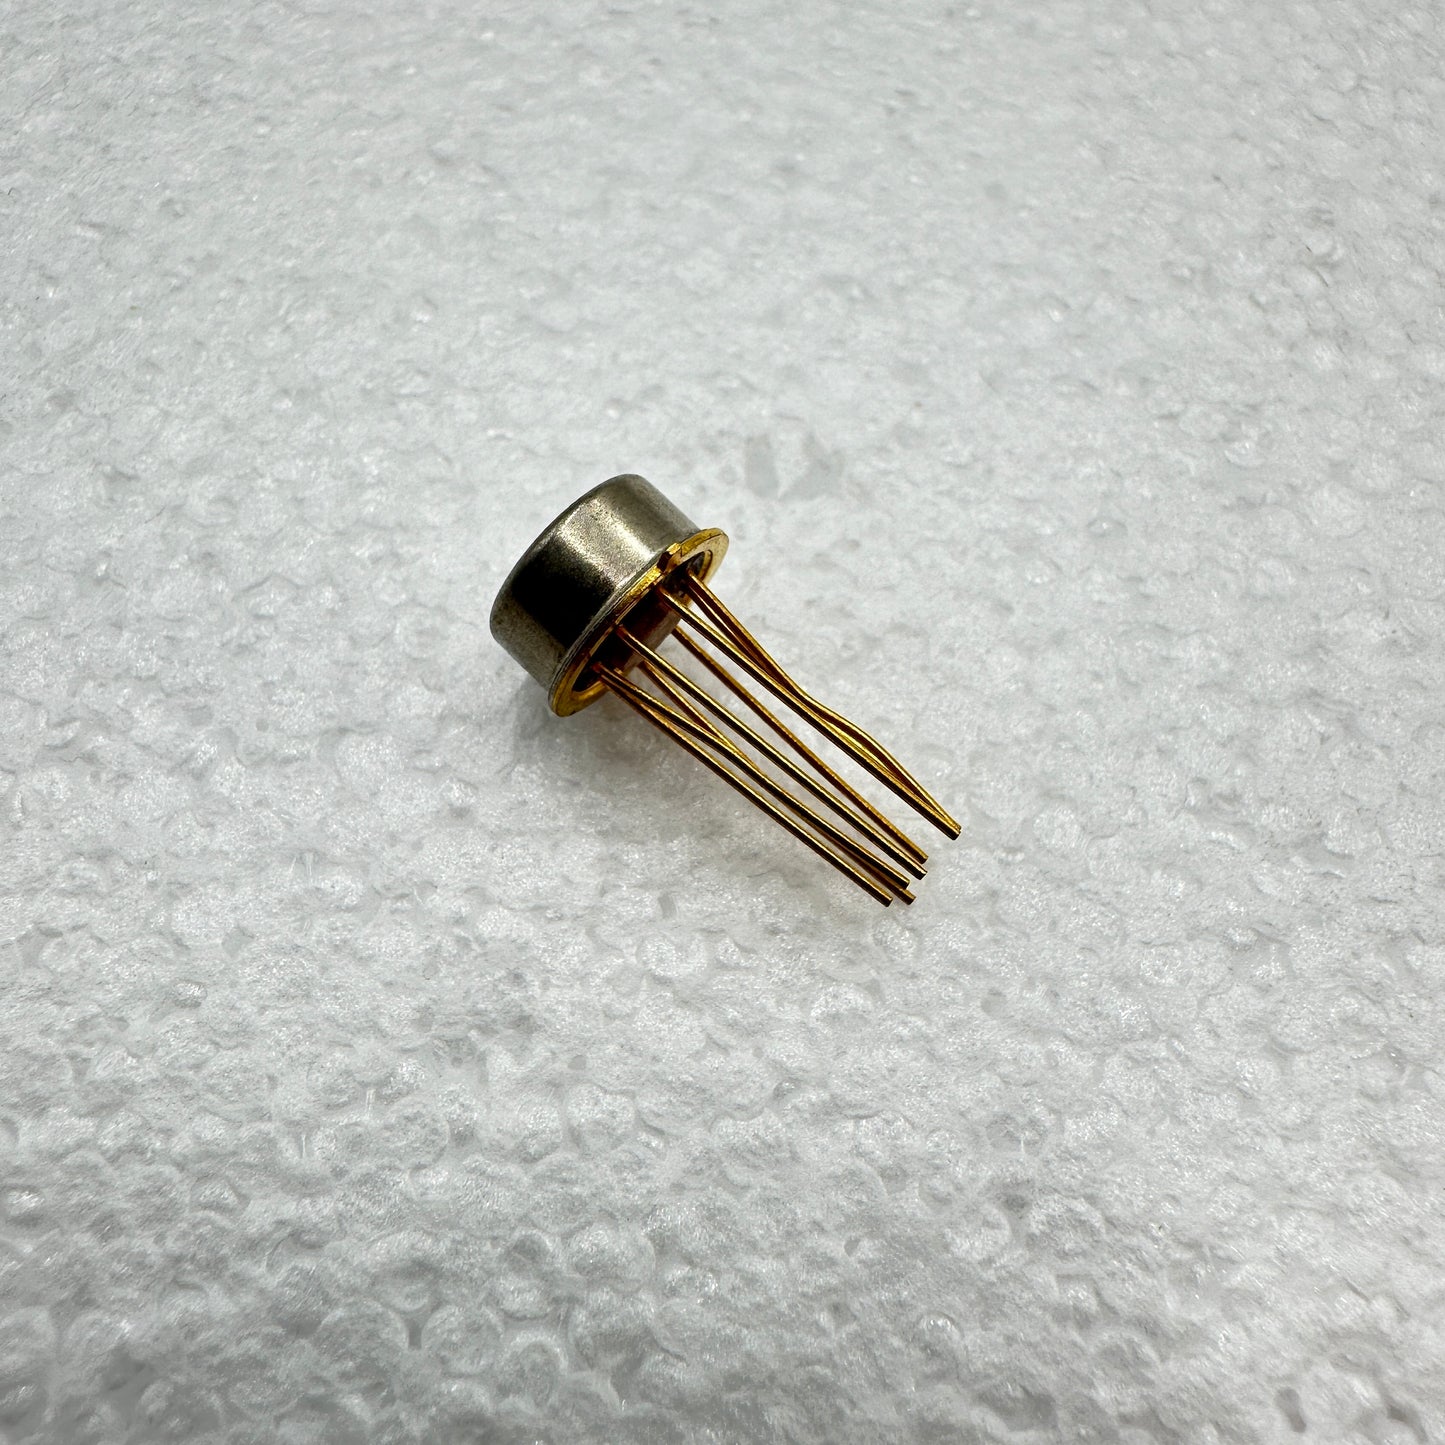 LM106L TO-99 Metal Can Gold Leads Military Spec Voltage Comparator TI LM 106L